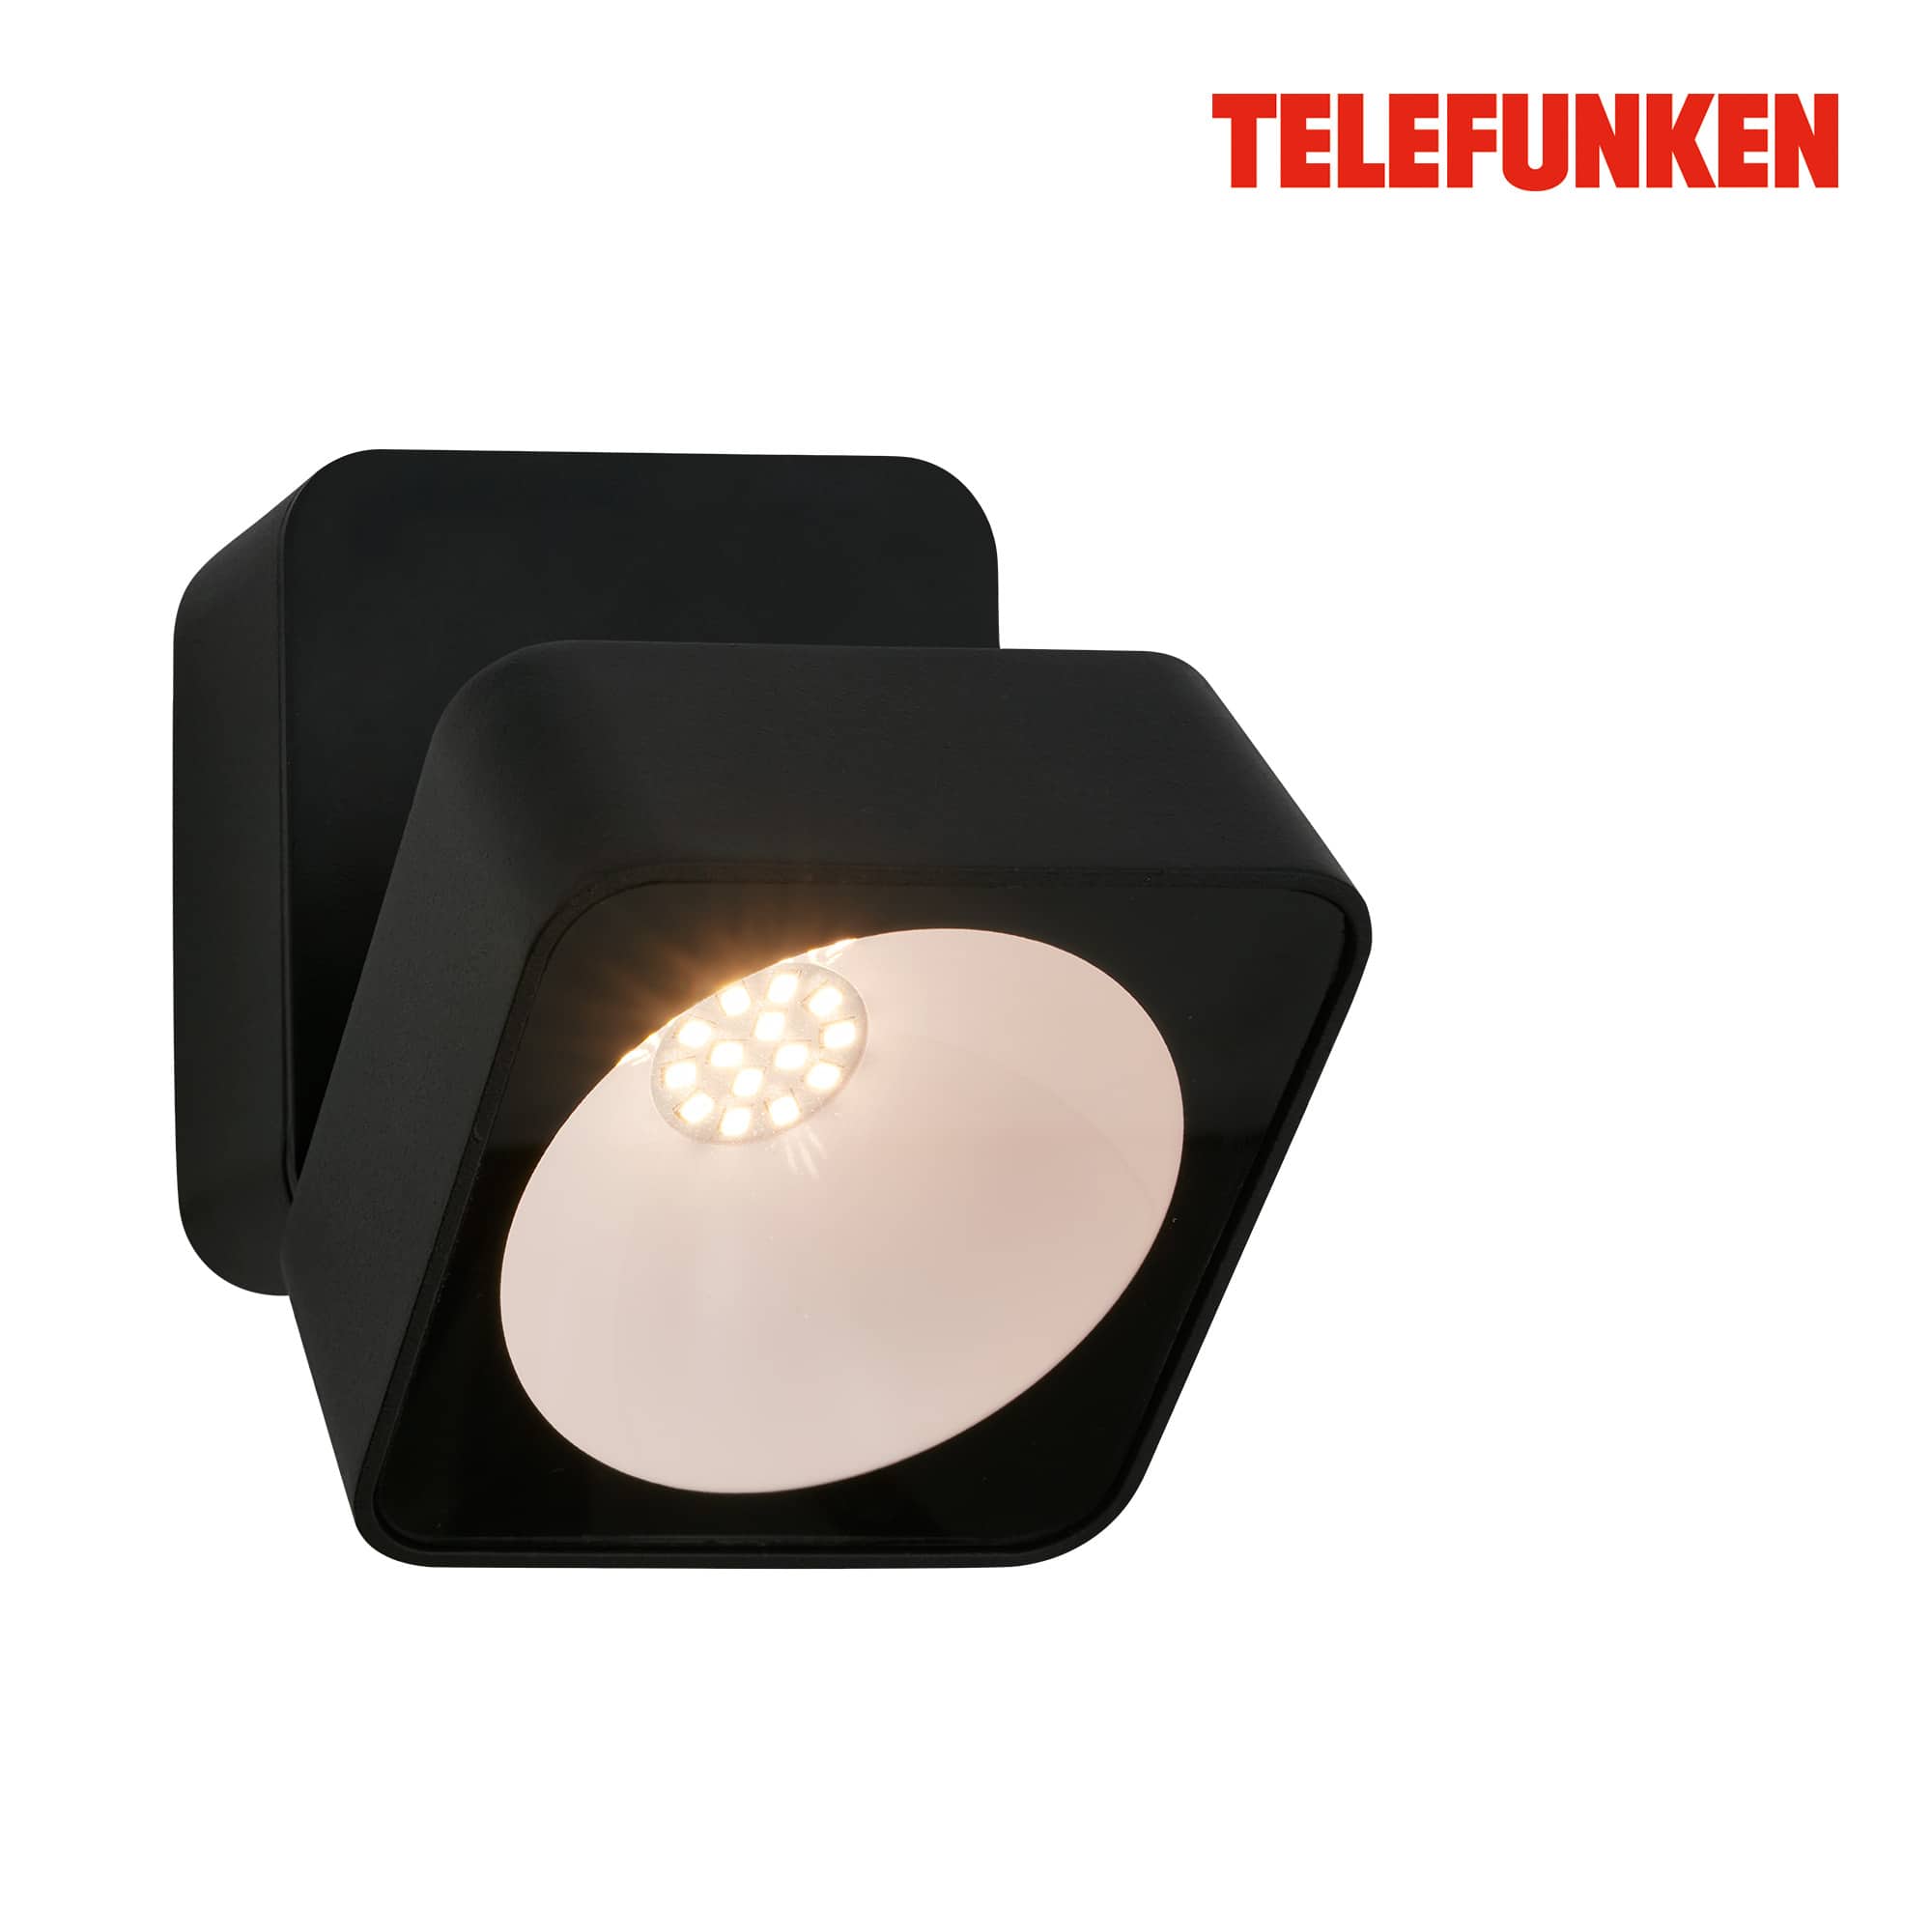 Telefunken LED wall lamp, splash water protection, On/Off via wall switch